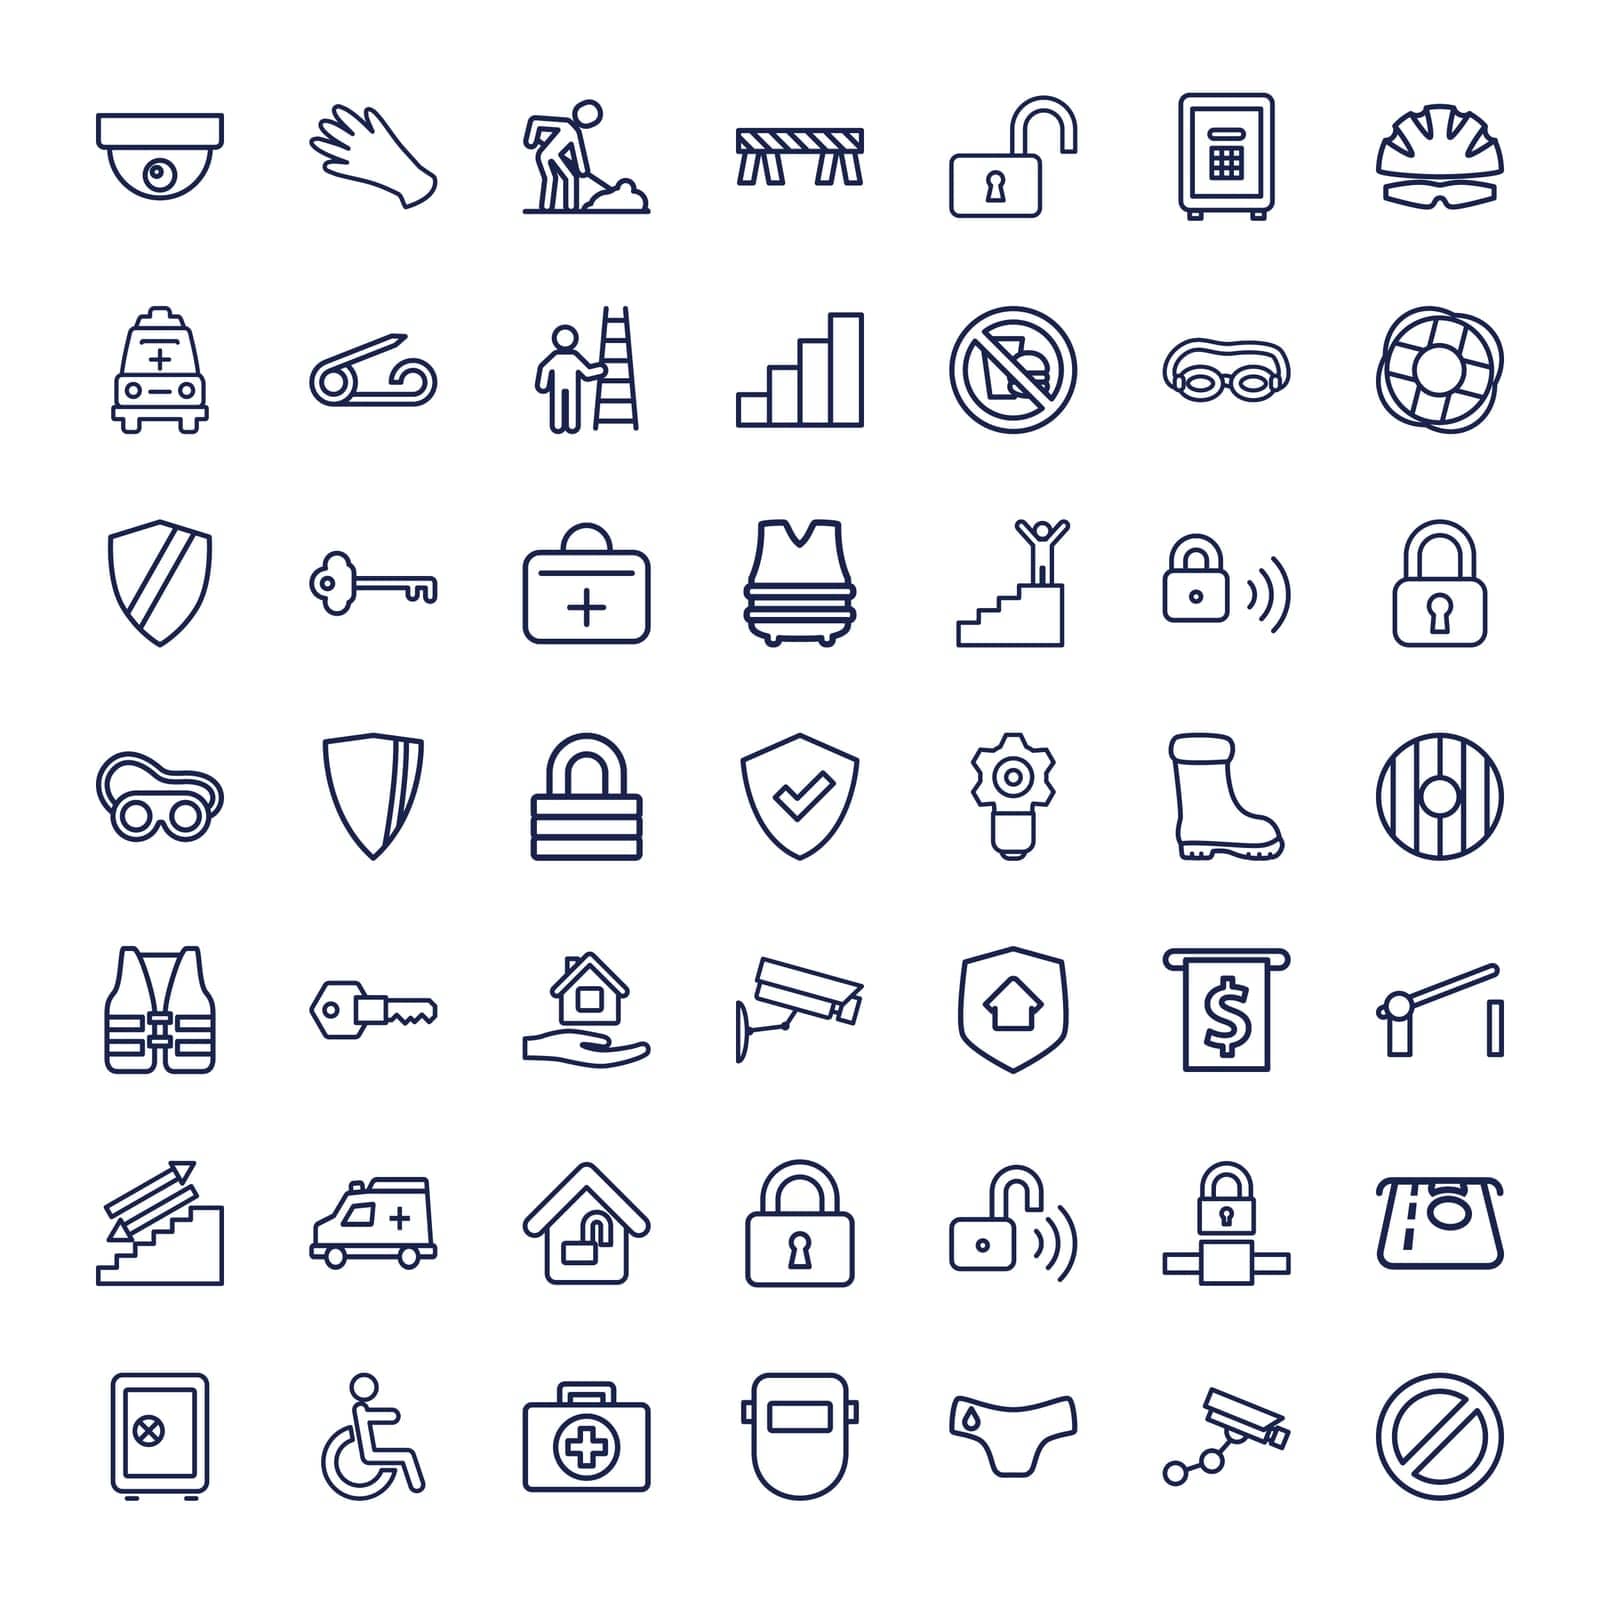 shield,panties,stairs,icon,life,security,barrier,children,safety,lock,disabled,vector,atm,camera,boot,key,mask,welder,set,in,vest,opened,ambulance,icons,home,keyhole,money,prohibited,safe,aid,first,care,gear,withdraw